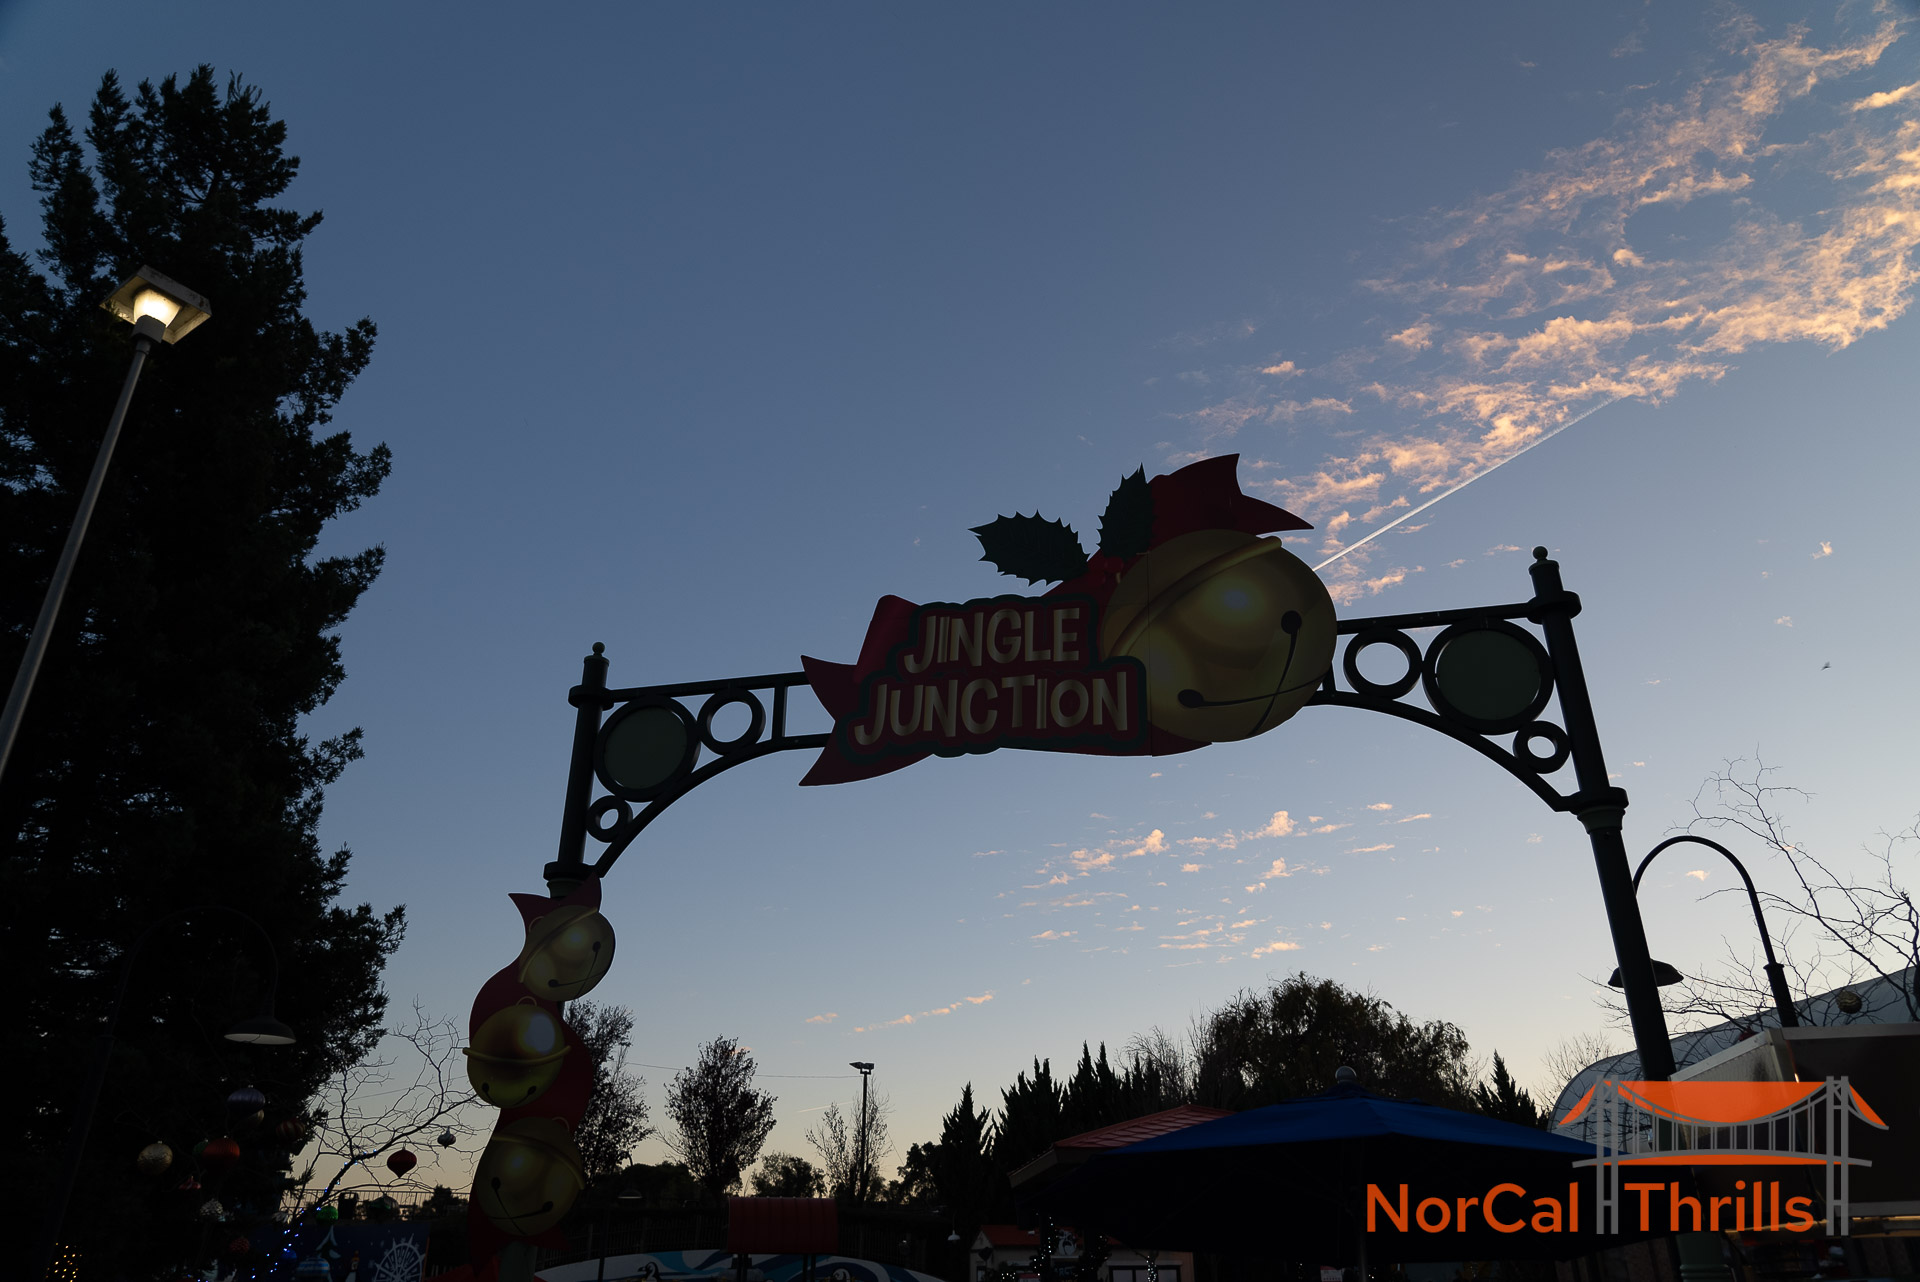 Holiday in the Park | Jingle Junction